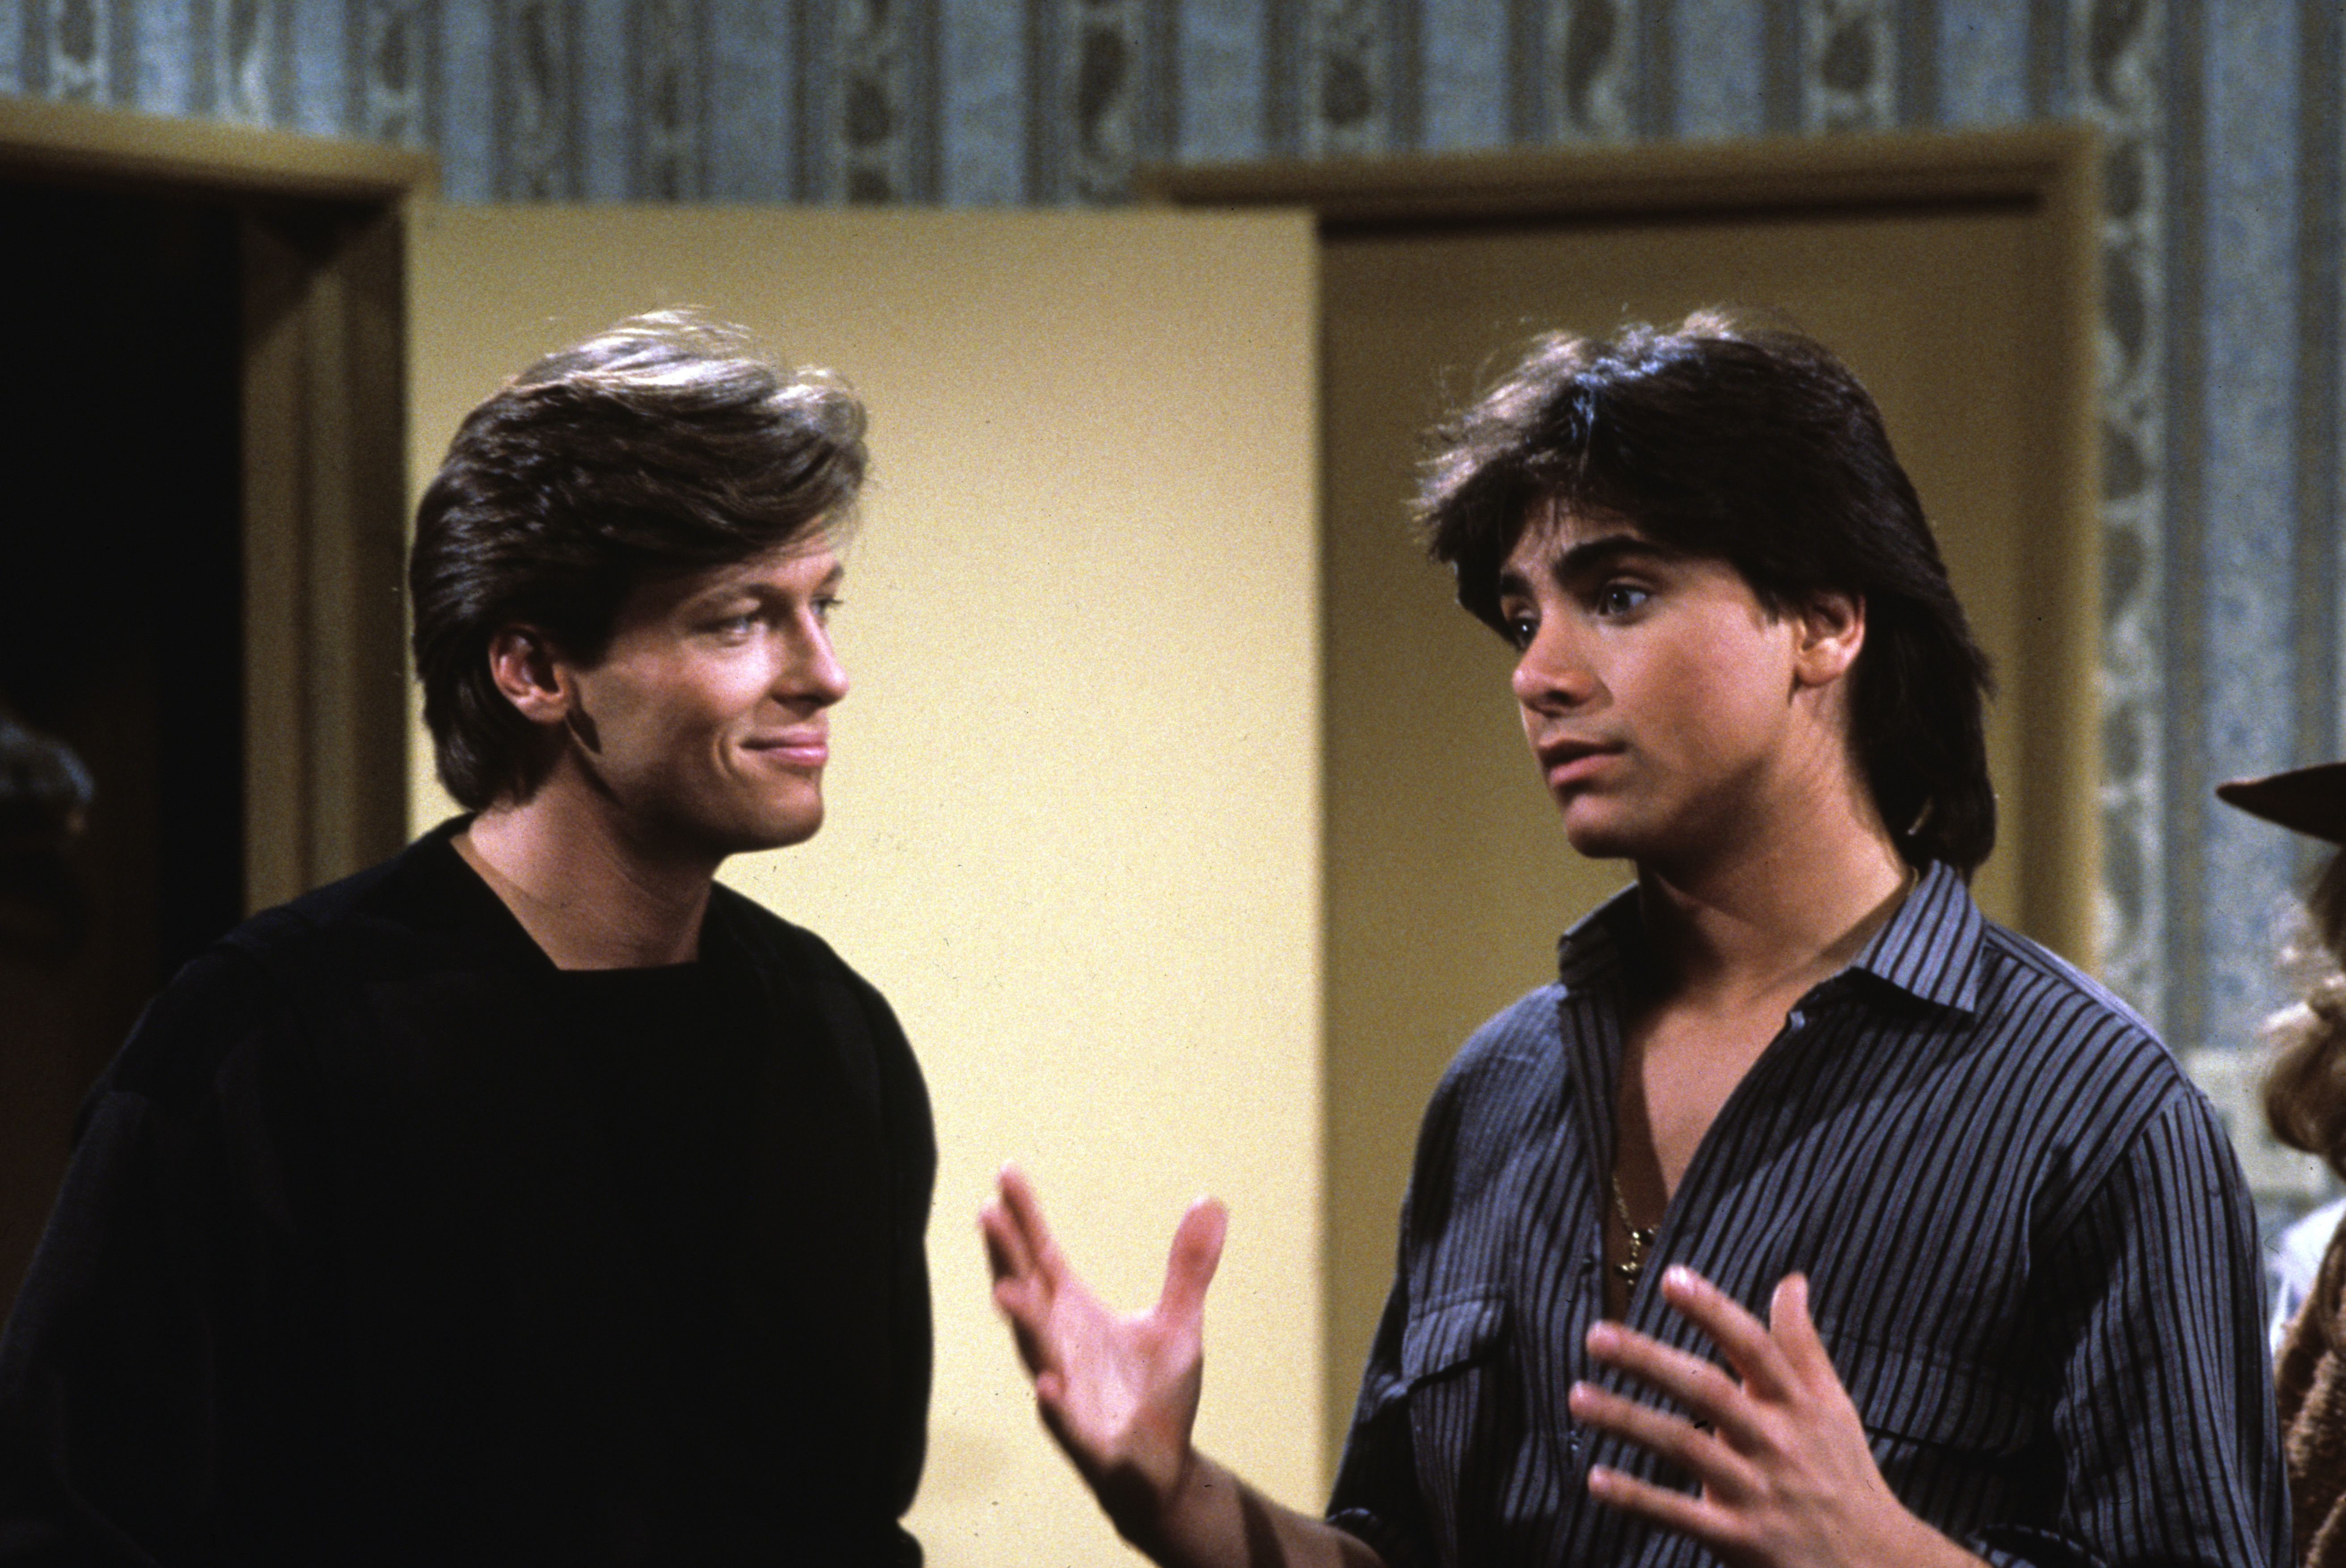 Jack Wagner and John Stamos on the set of "General Hospital" on November 6, 1983 | Source: Getty Images